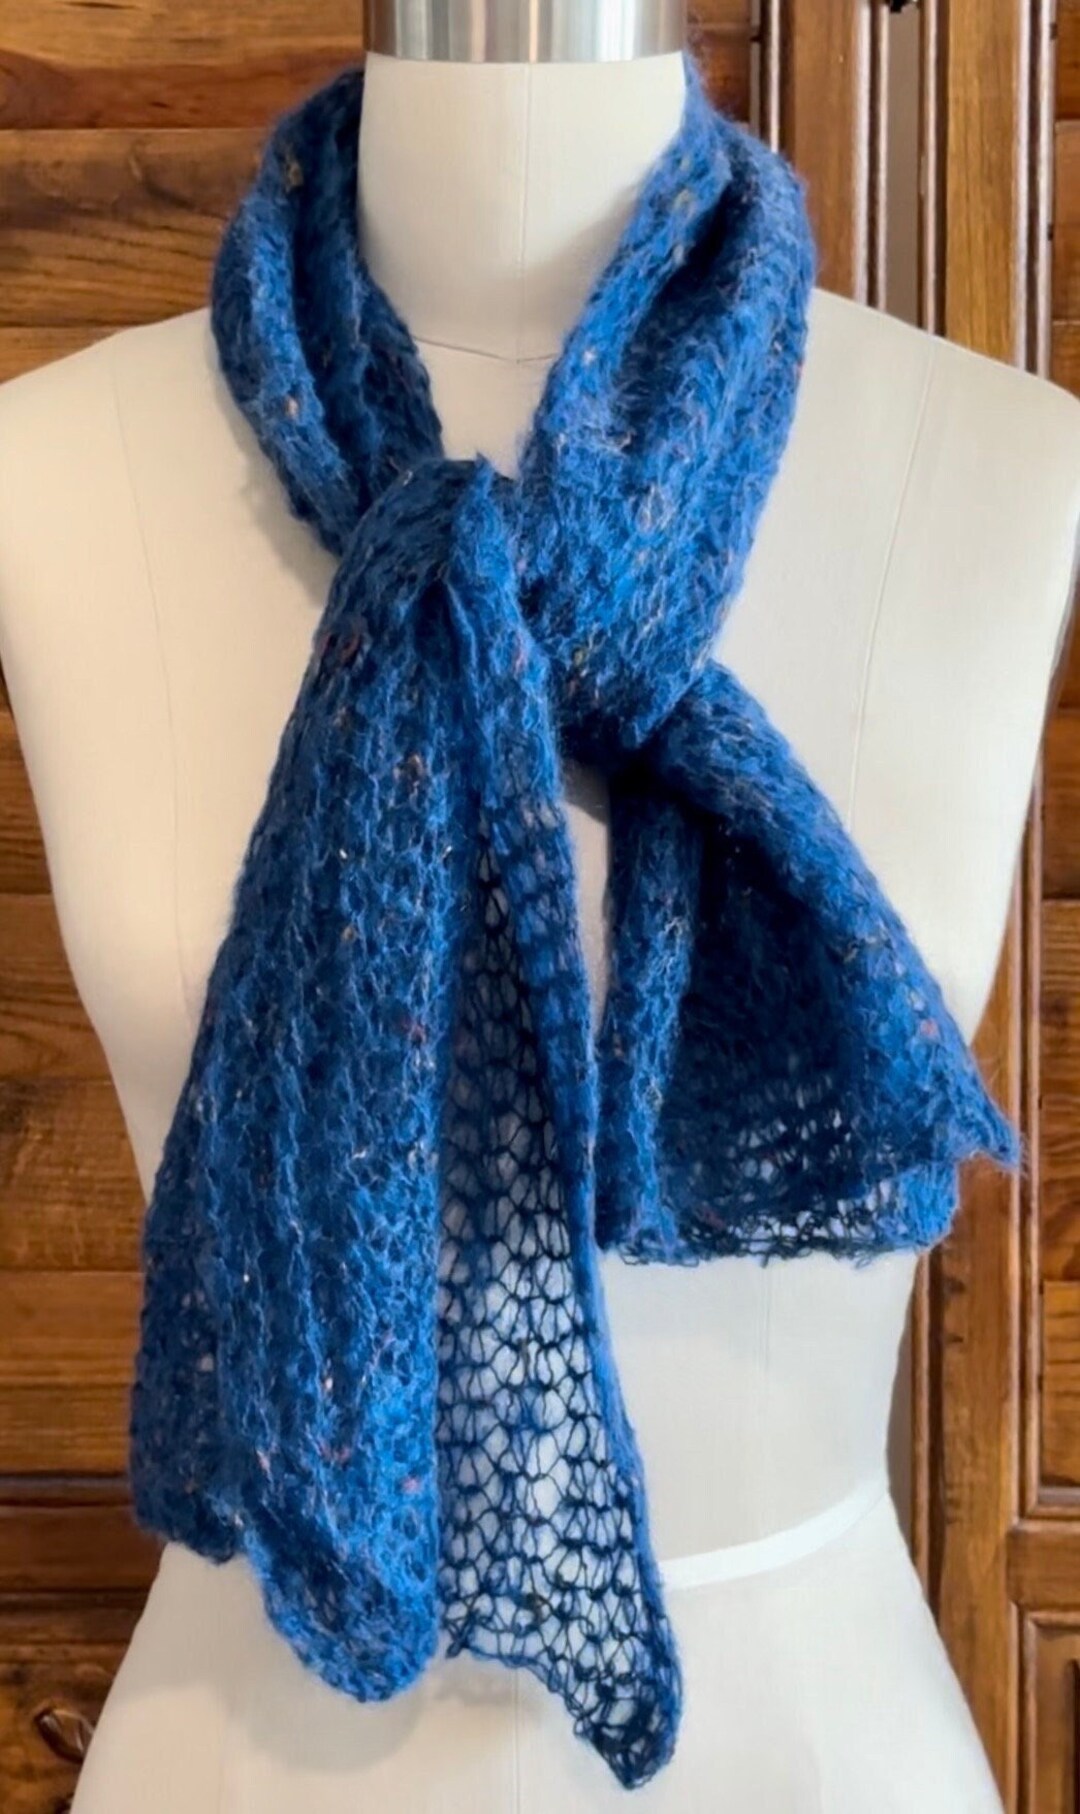 Mohair Blend Knit Winter Scarf in Blue Made in Italy Festive - Etsy